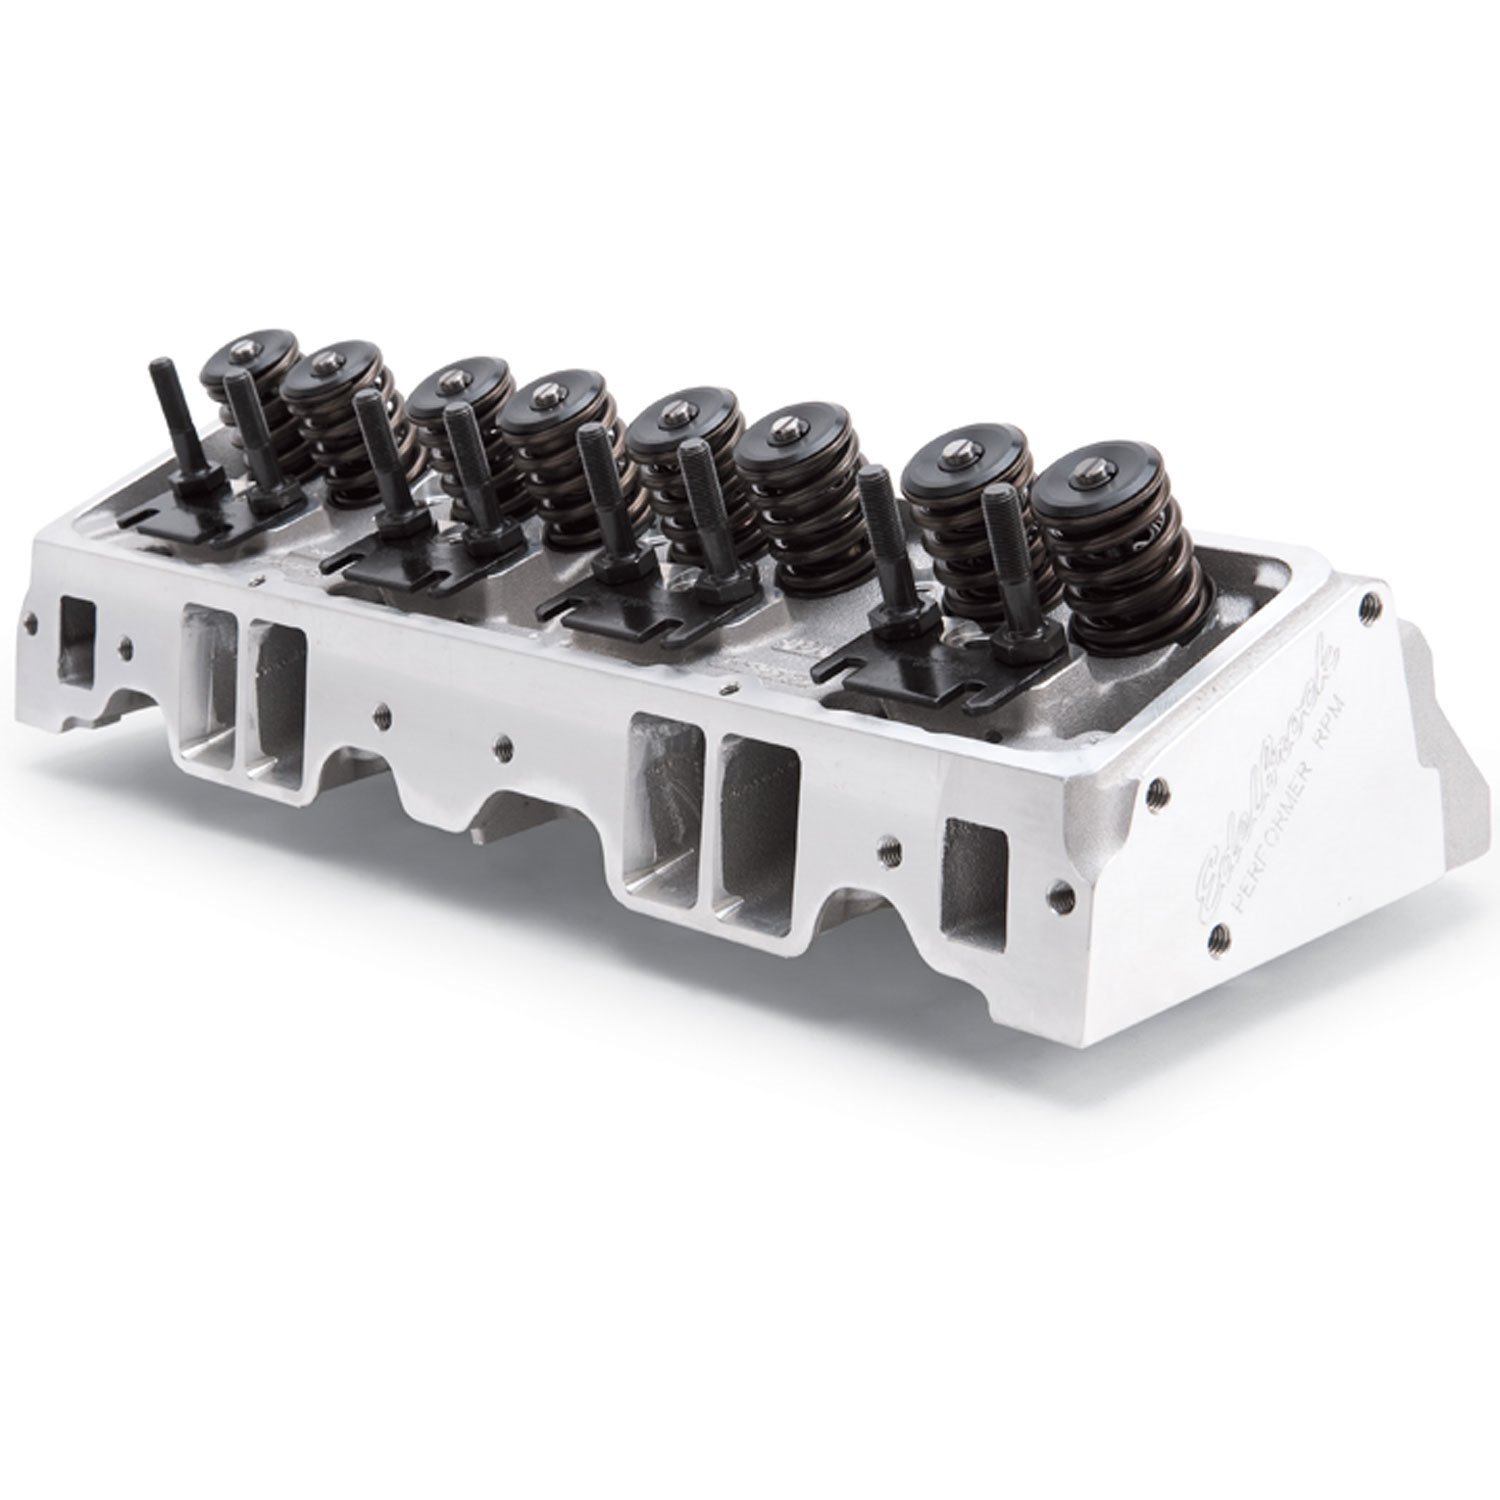 Performer RPM Cylinder Head for Small Block Chevy